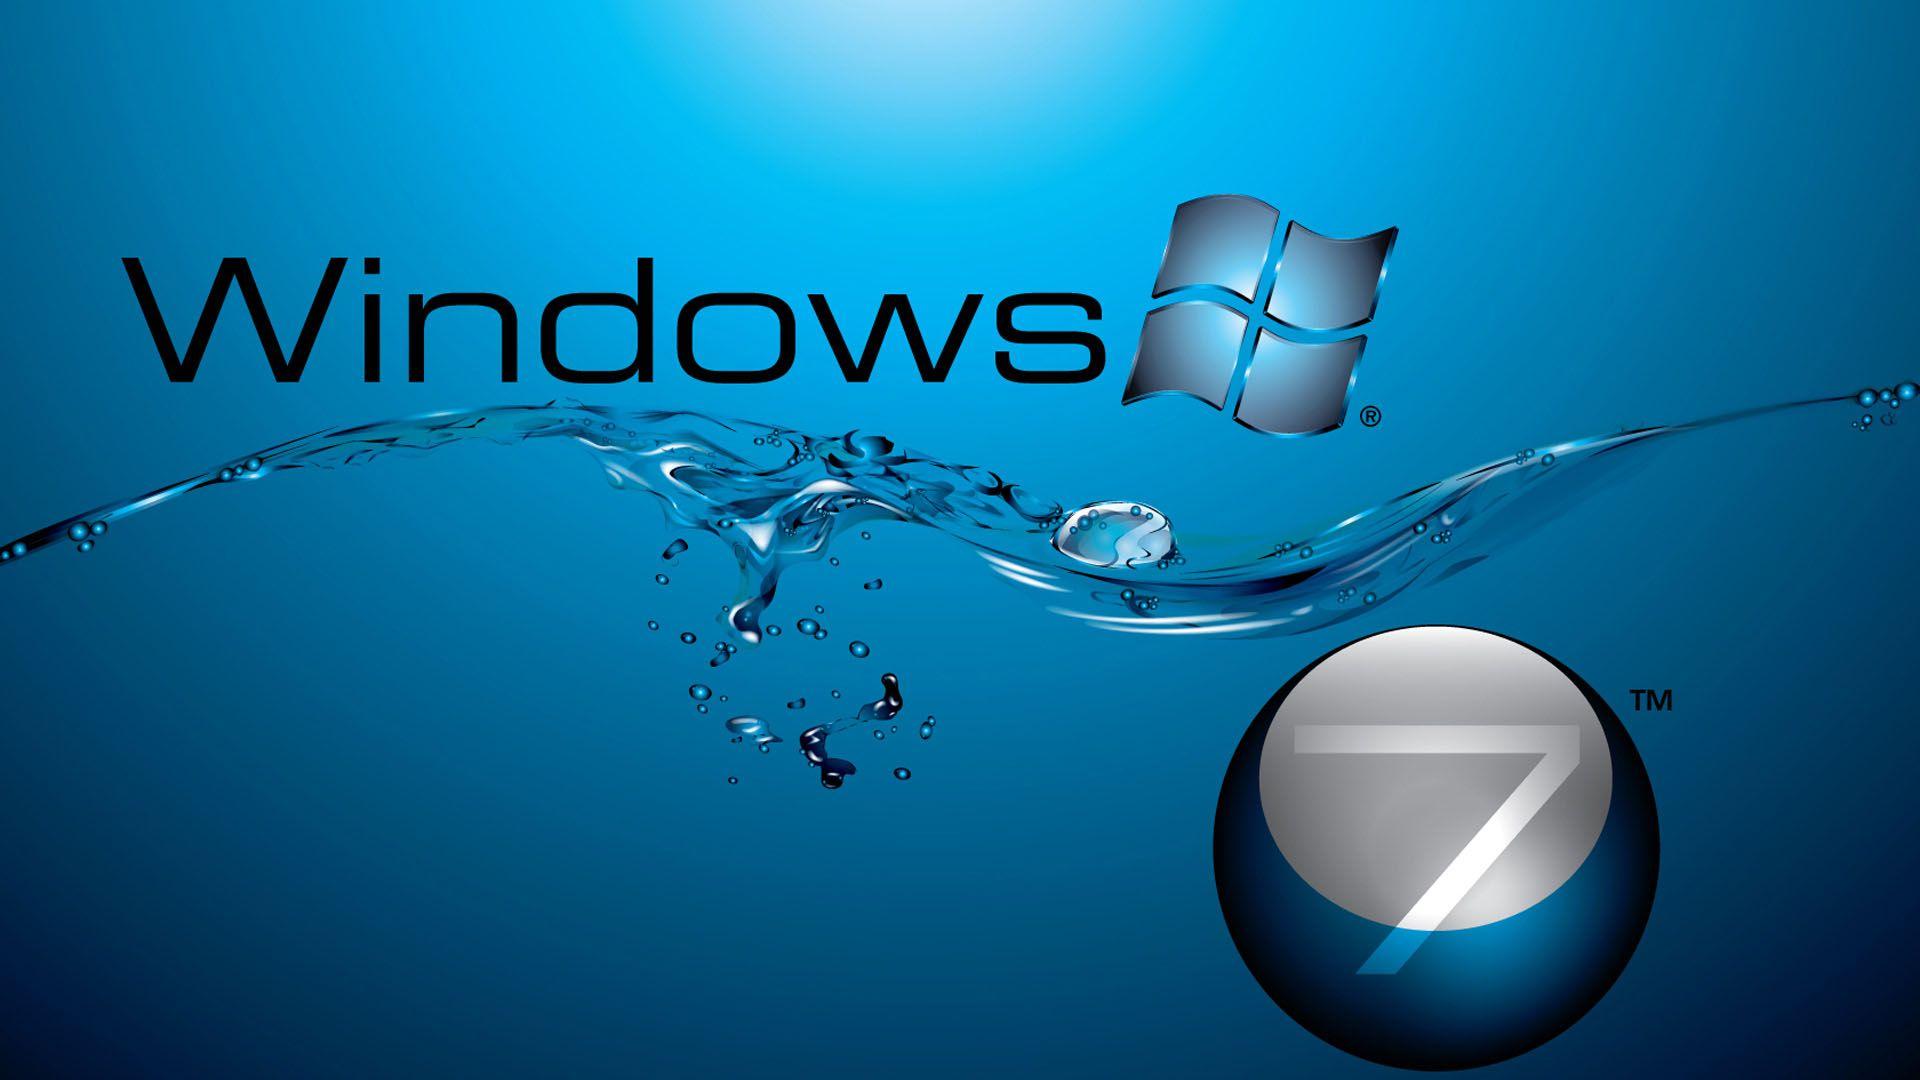 Wallpapers For > Hd Wallpapers 1080p Windows 7